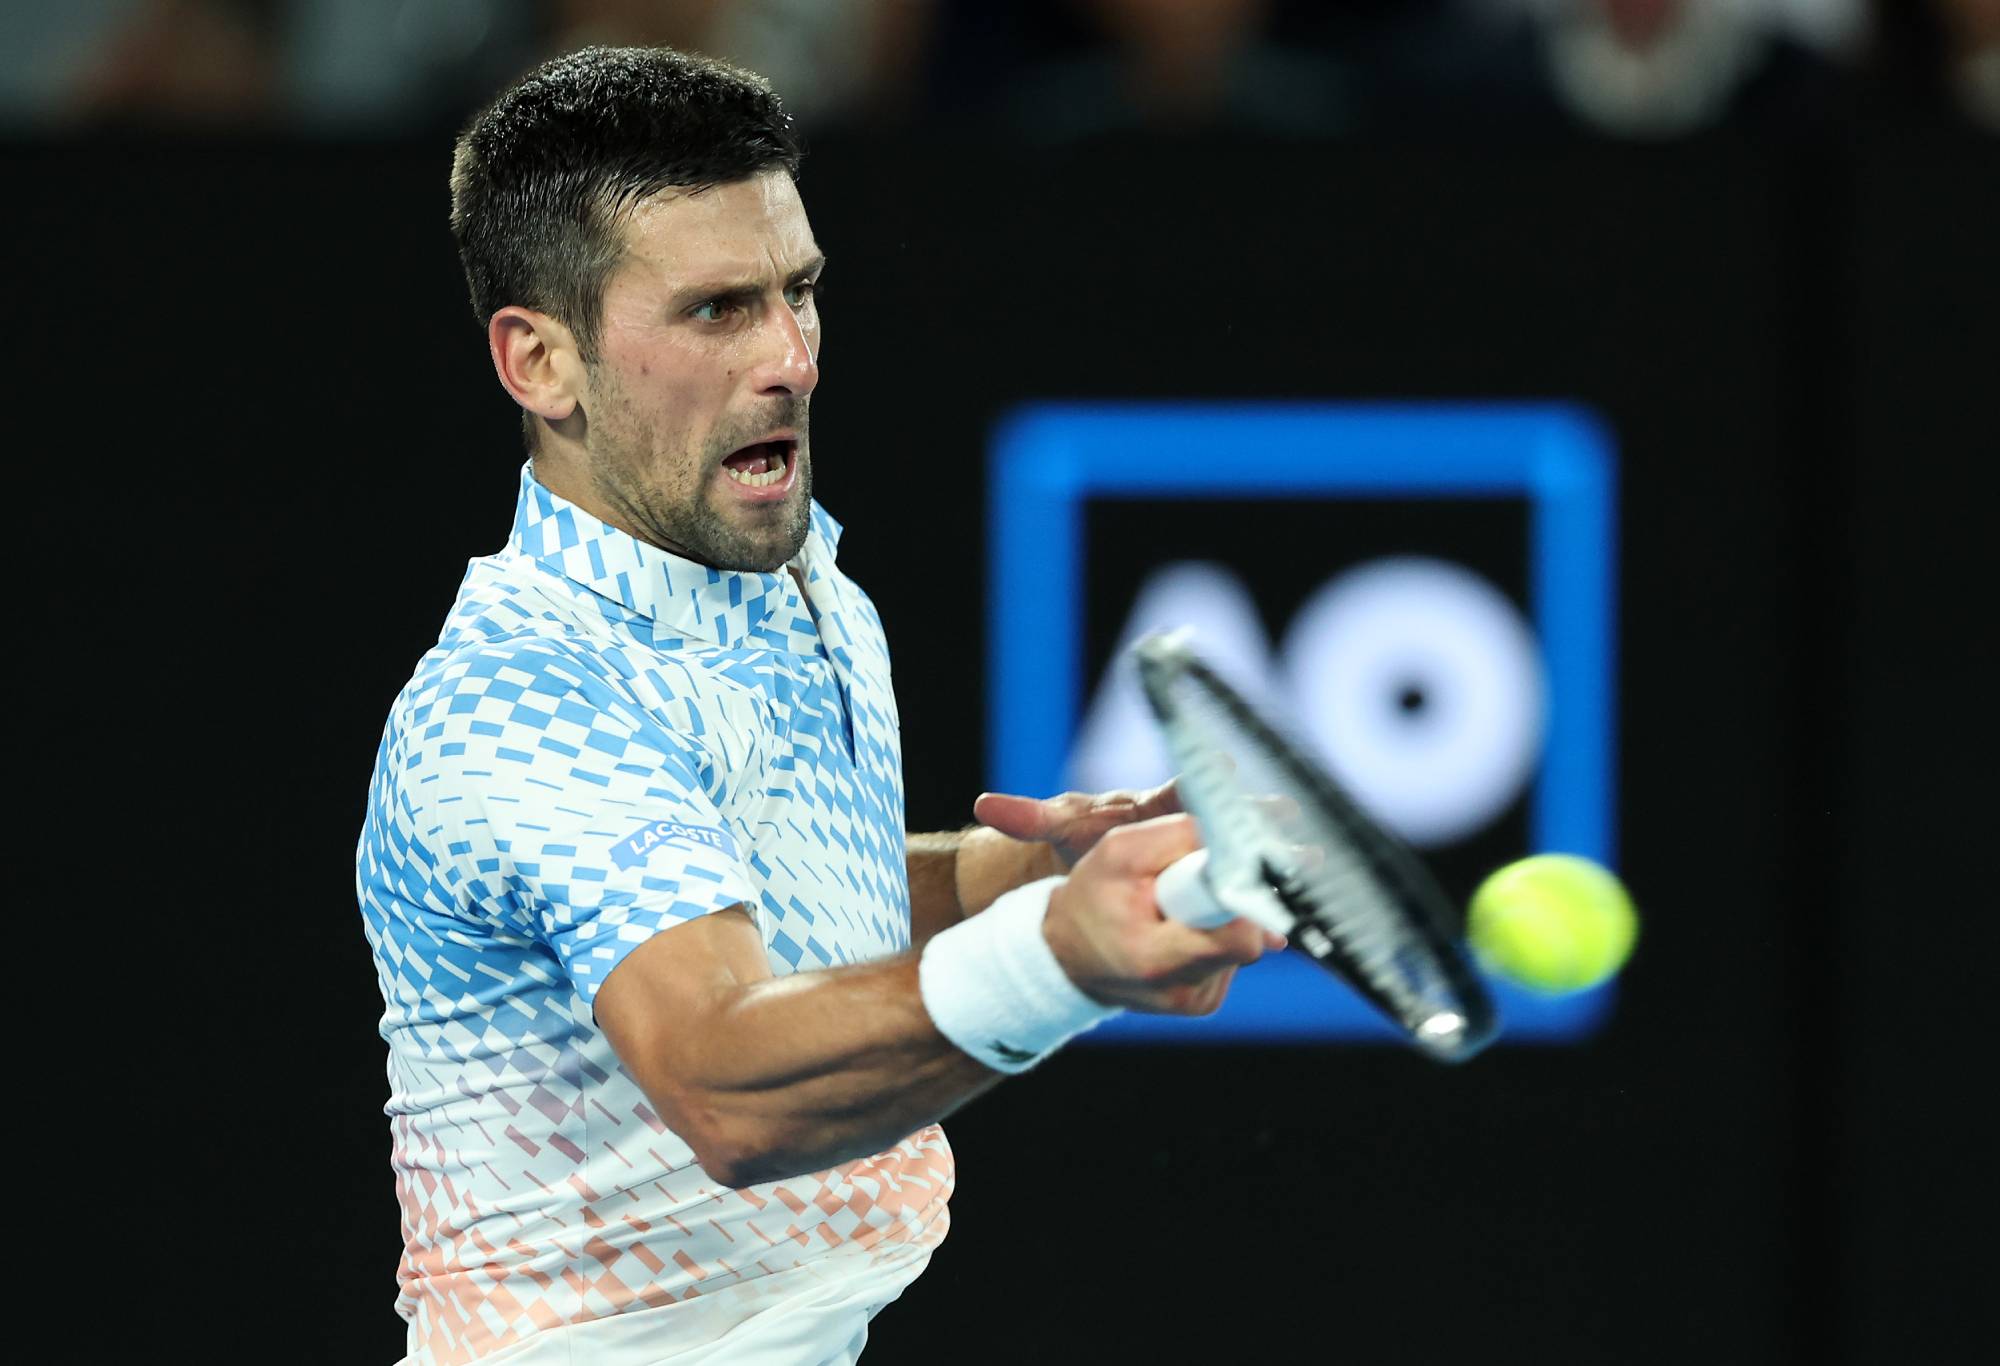 MELBOURNE, AUSTRALIA - JANUARY 29: Novak Djokovic of Serbia plays a forehand in the Mens Singles Final against Stefanos Tsitsipas of Greece during day 14 of the 2023 Australian Open at Melbourne Park on January 29, 2023 in Melbourne, Australia. (Photo by Cameron Spencer/Getty Images)